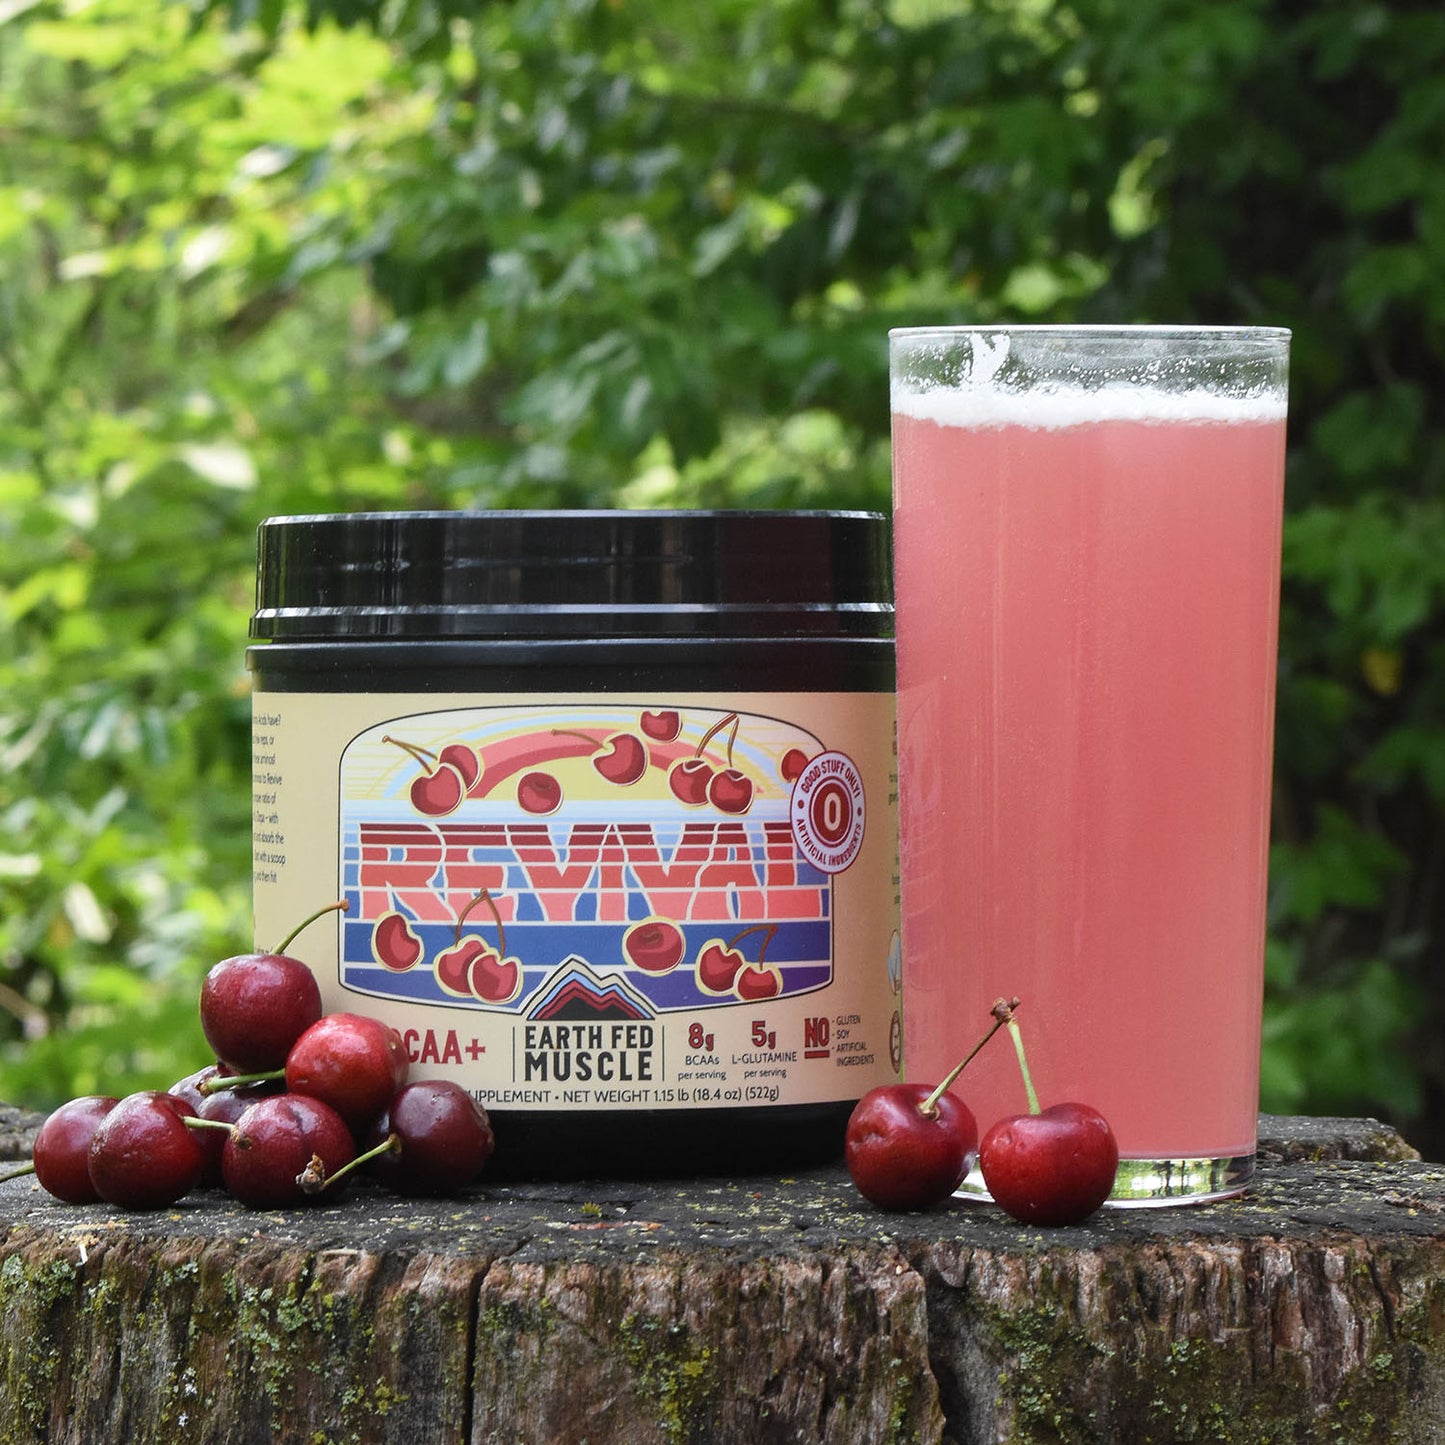 BCAA+ Revival Sour Cherry Intra-Sport